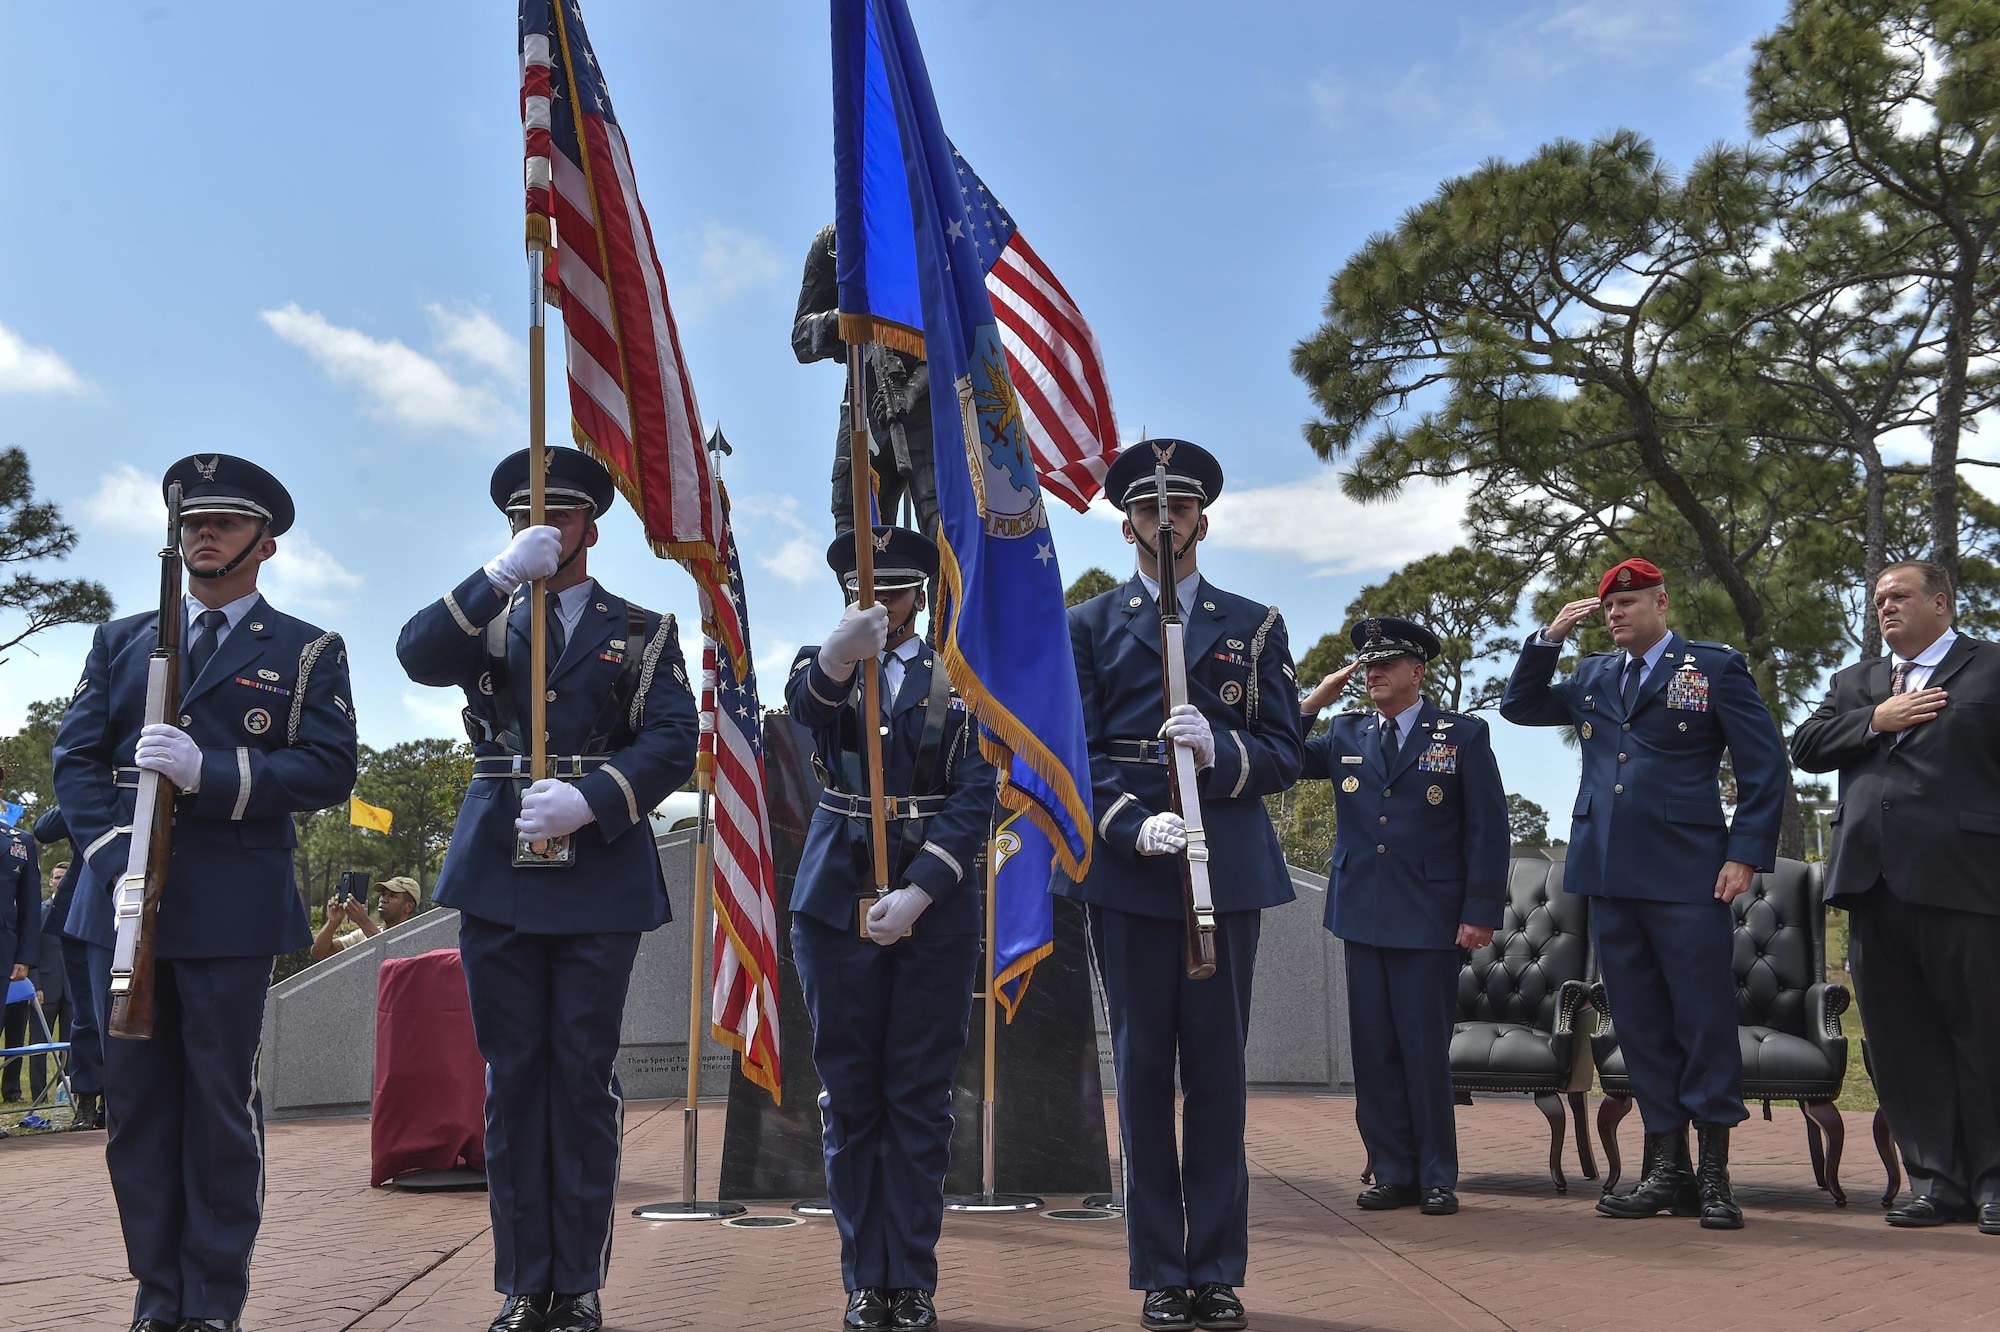 The Hurlburt Field Honor Guard present the colors during a dual Air Force Cross ceremony at Hurlburt Field, Fla., April 20, 2017. For the first time in Air Force history, two Airmen were simultaneously awarded the service’s highest medal for valorous action in combat. Master Sgt. (Ret.) Keary Miller, a retired Special Tactics pararescueman from the Air National Guard’s 123rd Special Tactics Squadron, and Chris Baradat, a combat controller since separated, both received Silver Star medals for their actions in combat, which were upgraded after a service-wide review. (U.S. Air Force photo by Senior Airman Ryan Conroy) 